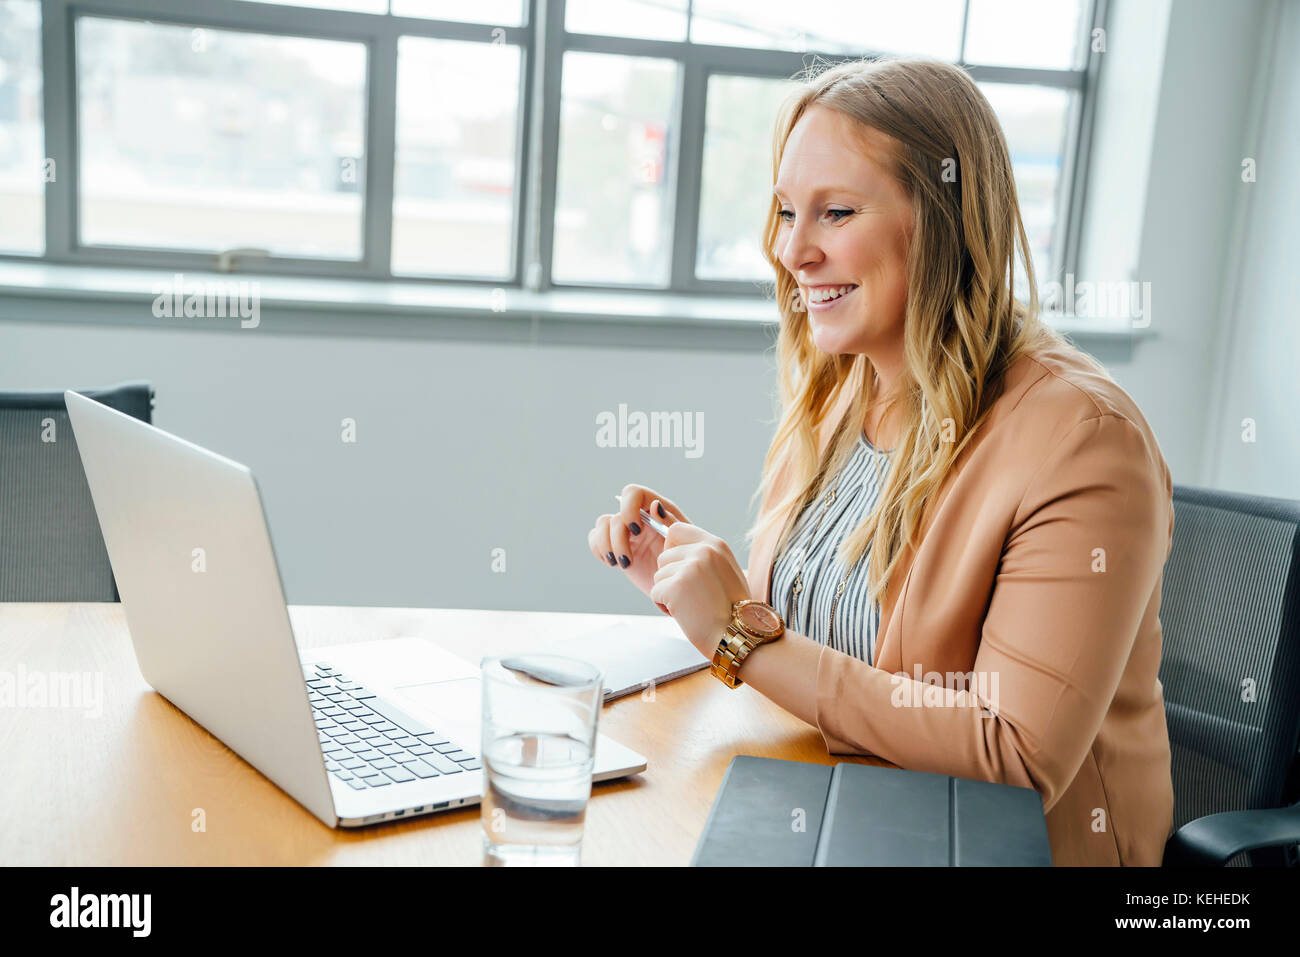 Businesswoman on video conference Stock Photo